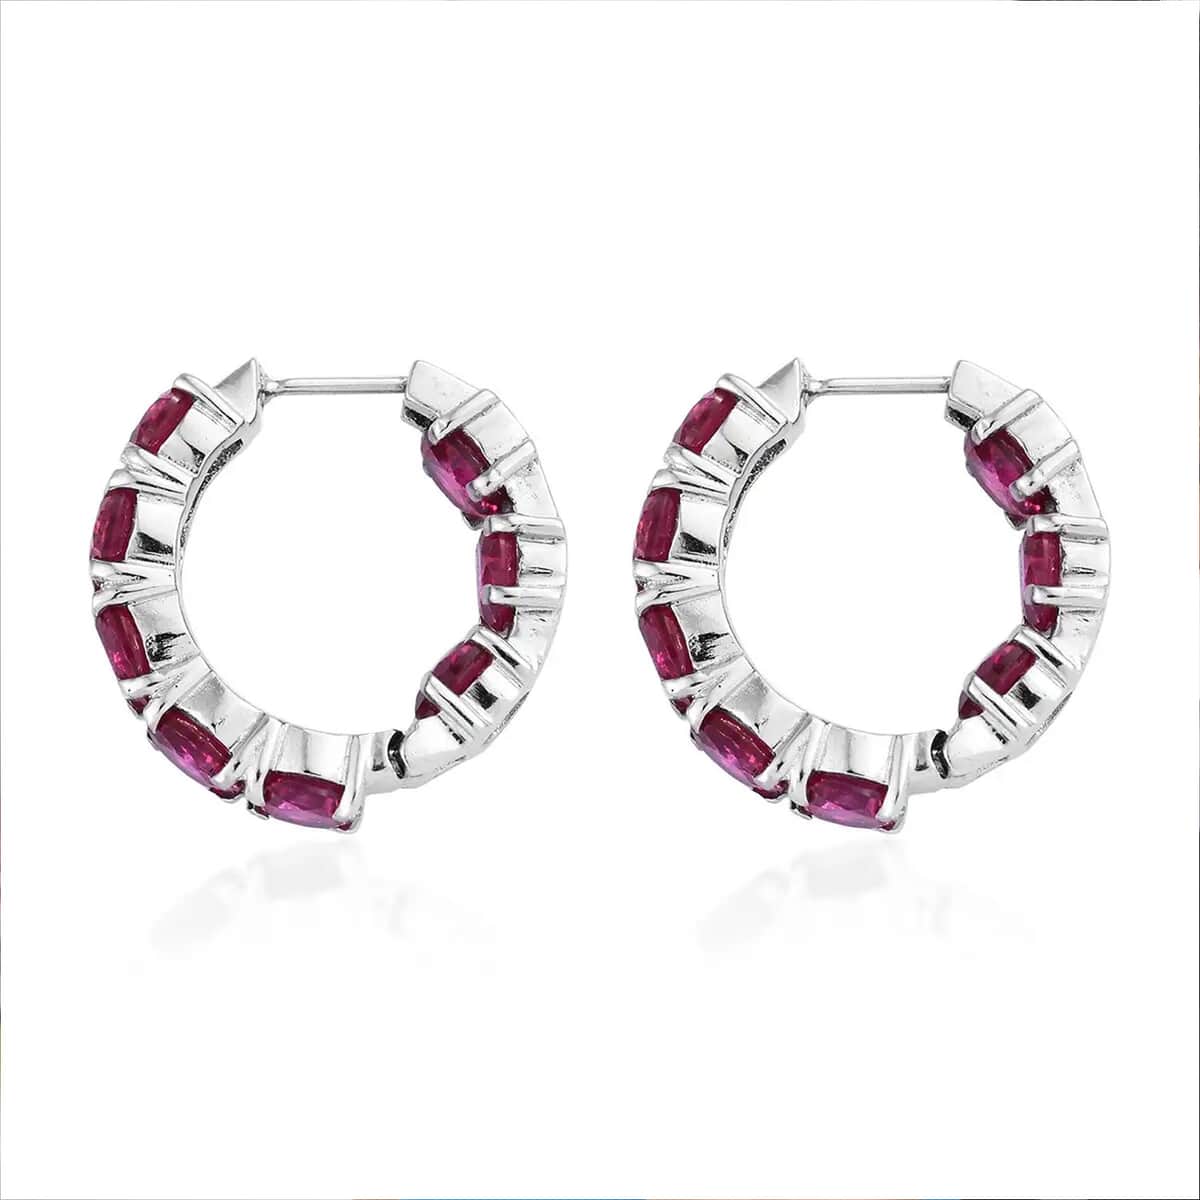 Simulated Ruby Color Diamond Earrings in Stainless Steel, Inside Out Hoops, Simulated Diamond Jewelry For Women image number 6